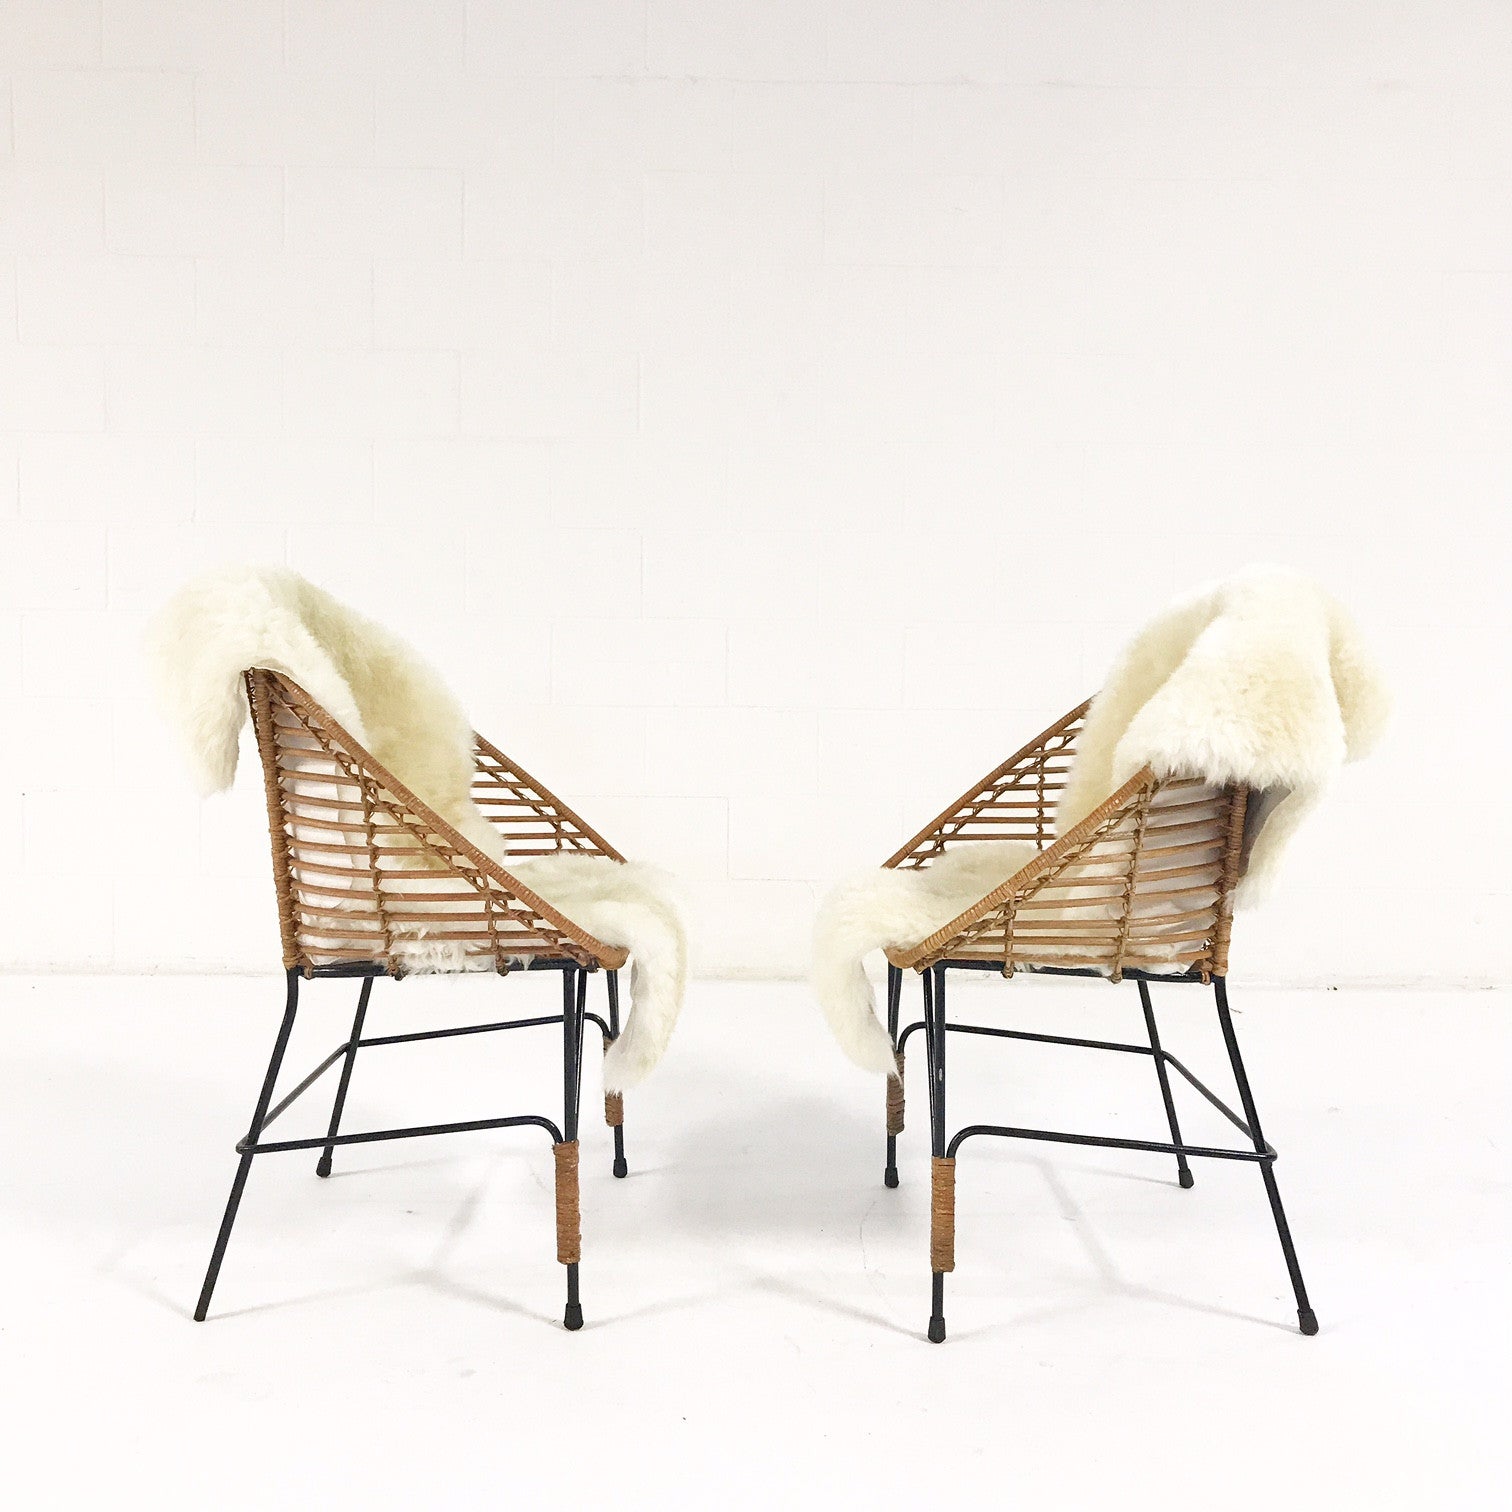 Vintage Mid-Century Iron and Rattan Chairs with Brazilian Sheepskins - Pair - FORSYTH